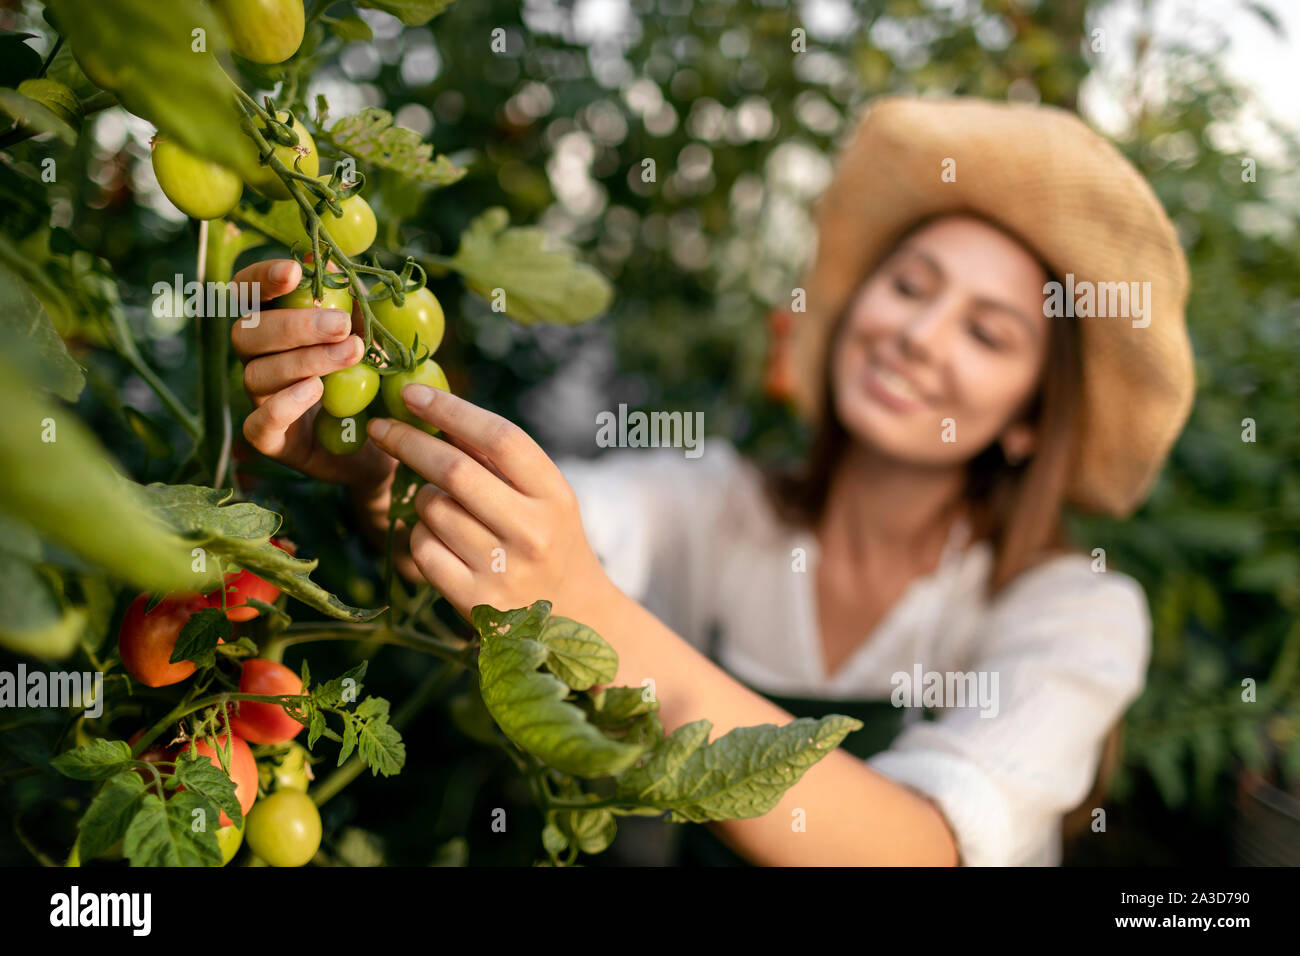 Closeup of young woman with blurred face inspecting tomato plantings Stock Photo